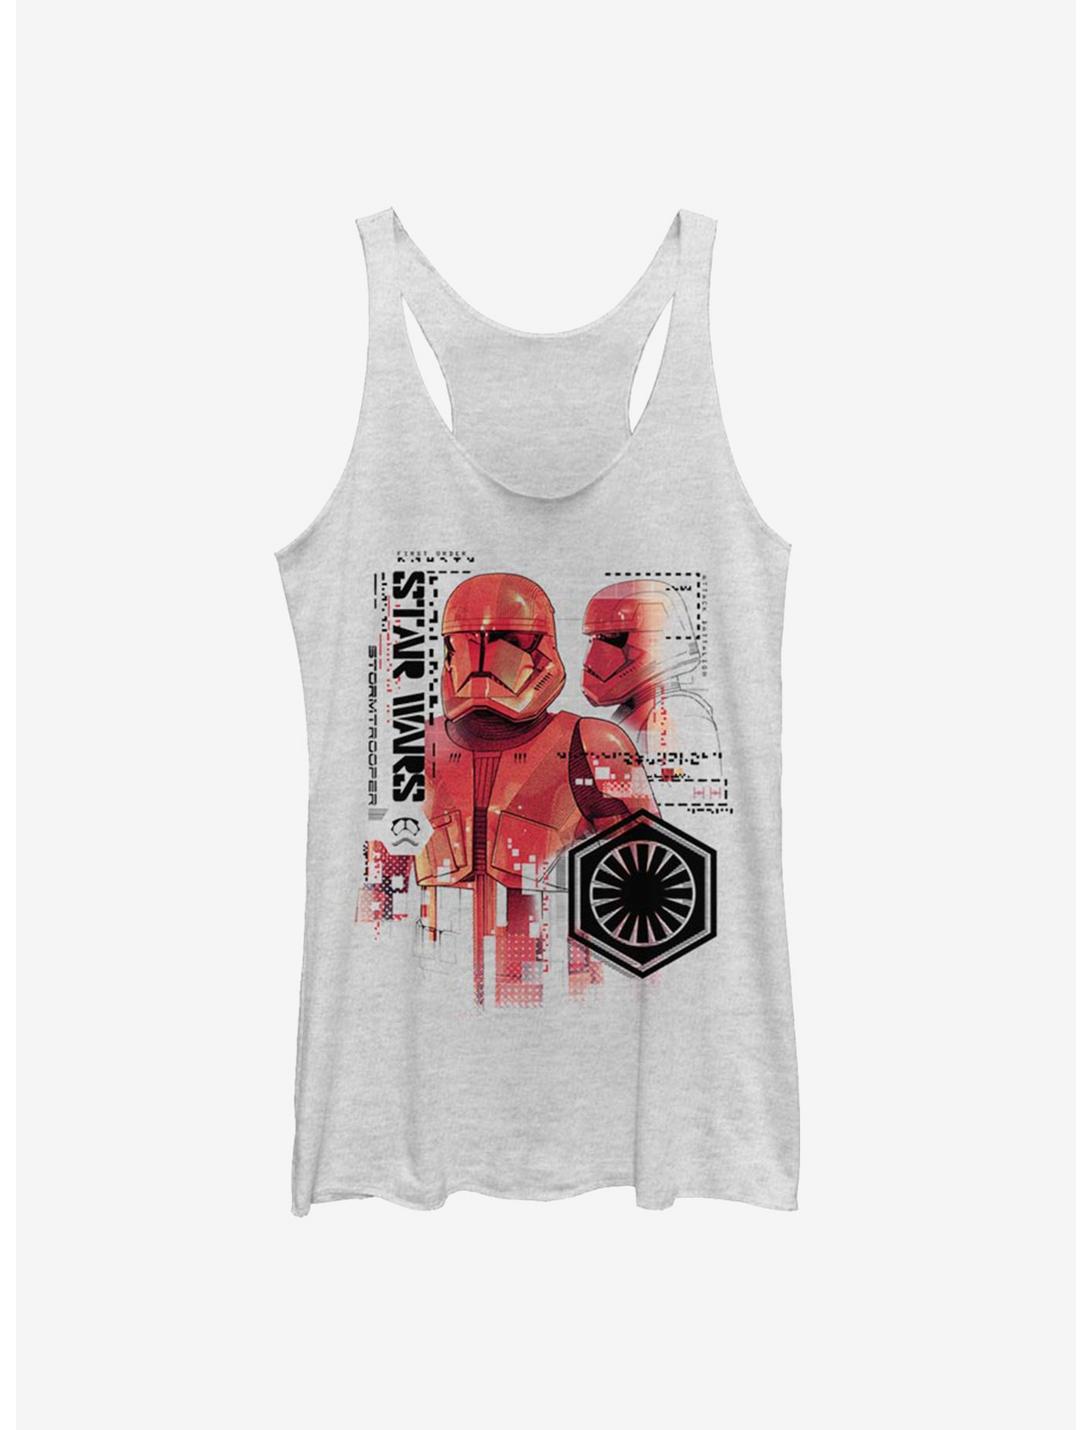 Star Wars Episode IX The Rise Of Skywalker Red Trooper Schematic Womens Tank Top, WHITE HTR, hi-res